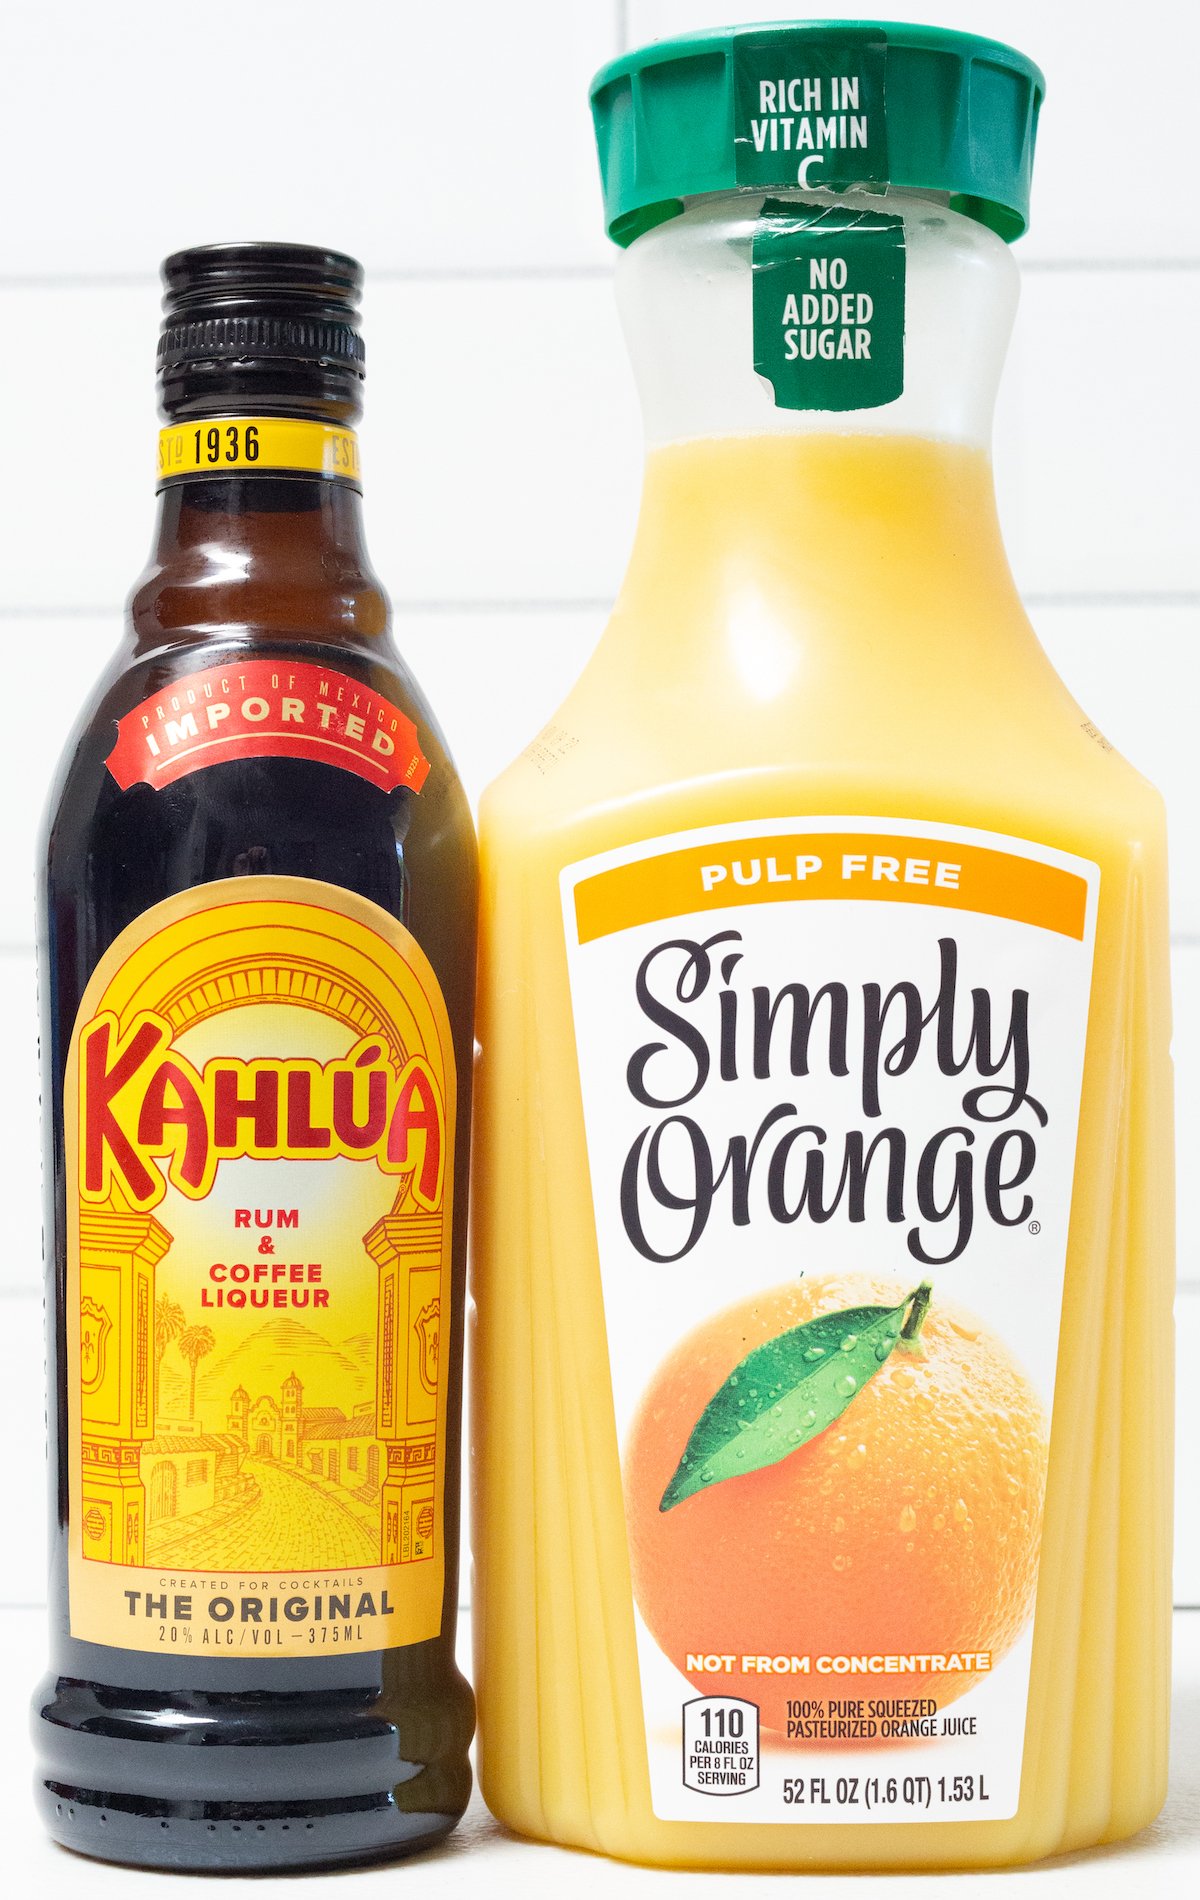 A bottle of Kahlua next to a bottle of orange juice in front of a white background.